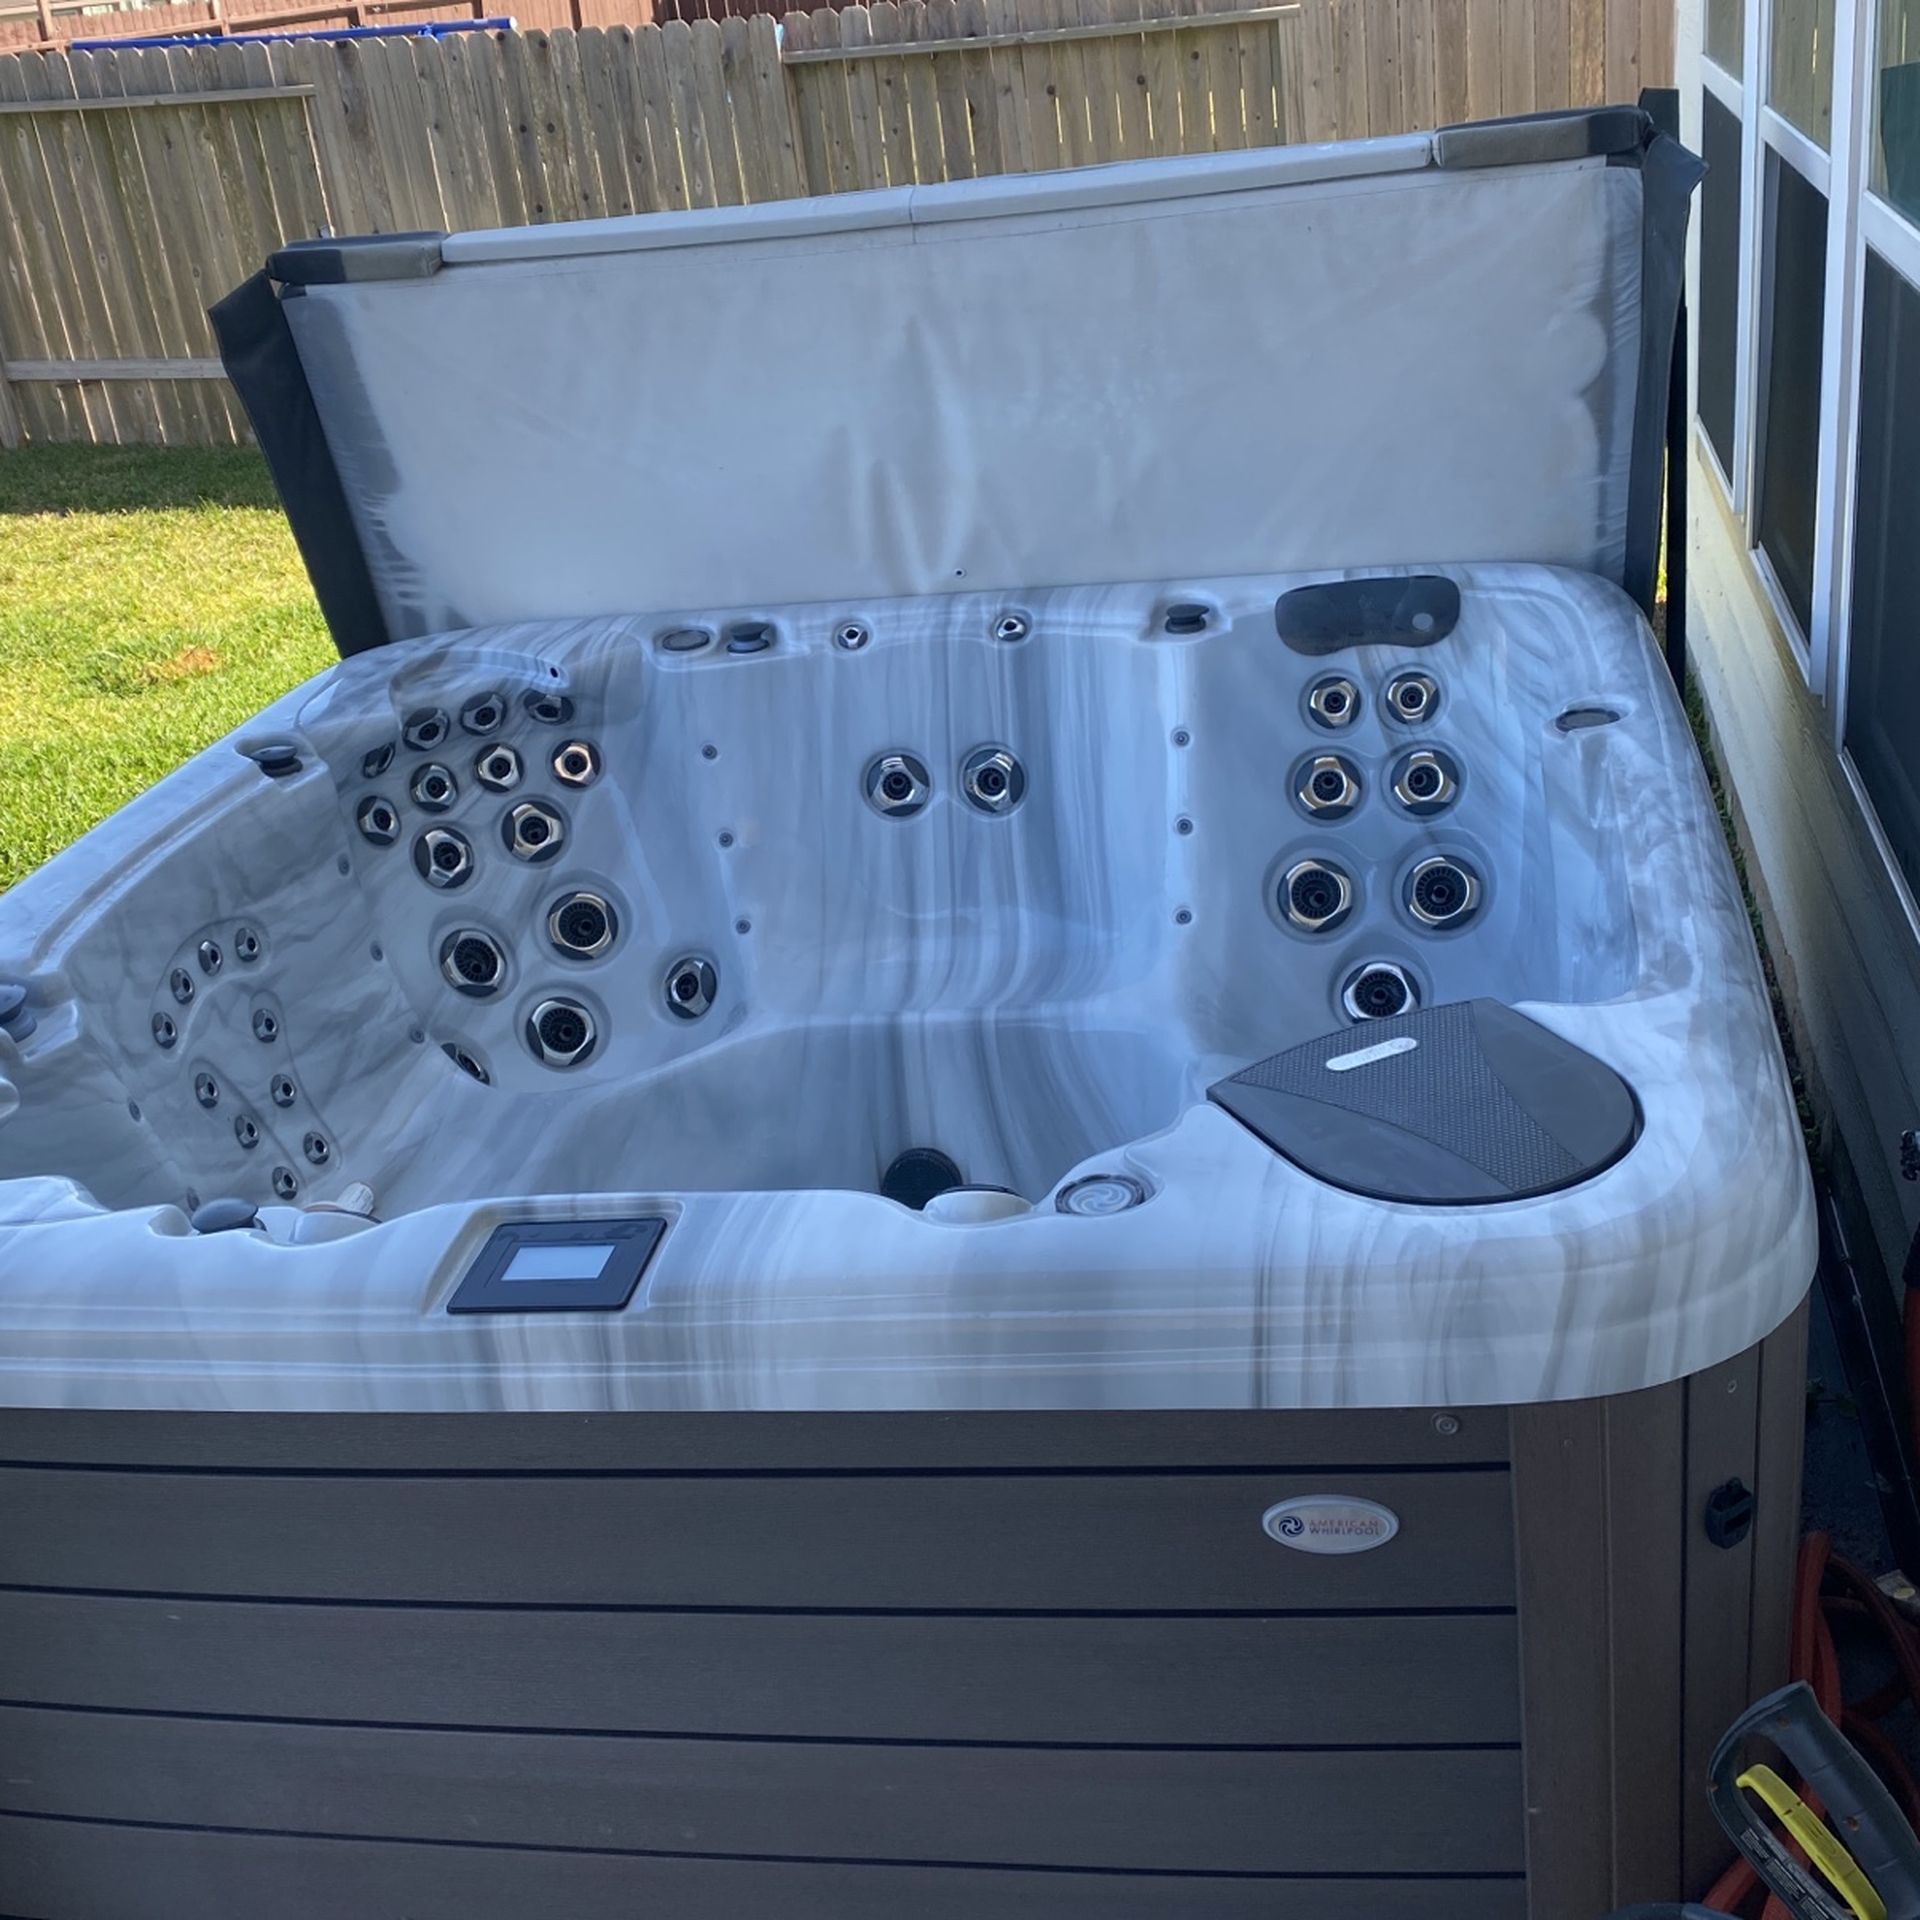 NEW HOT TUB(american Whirlpool) Used 5 Times